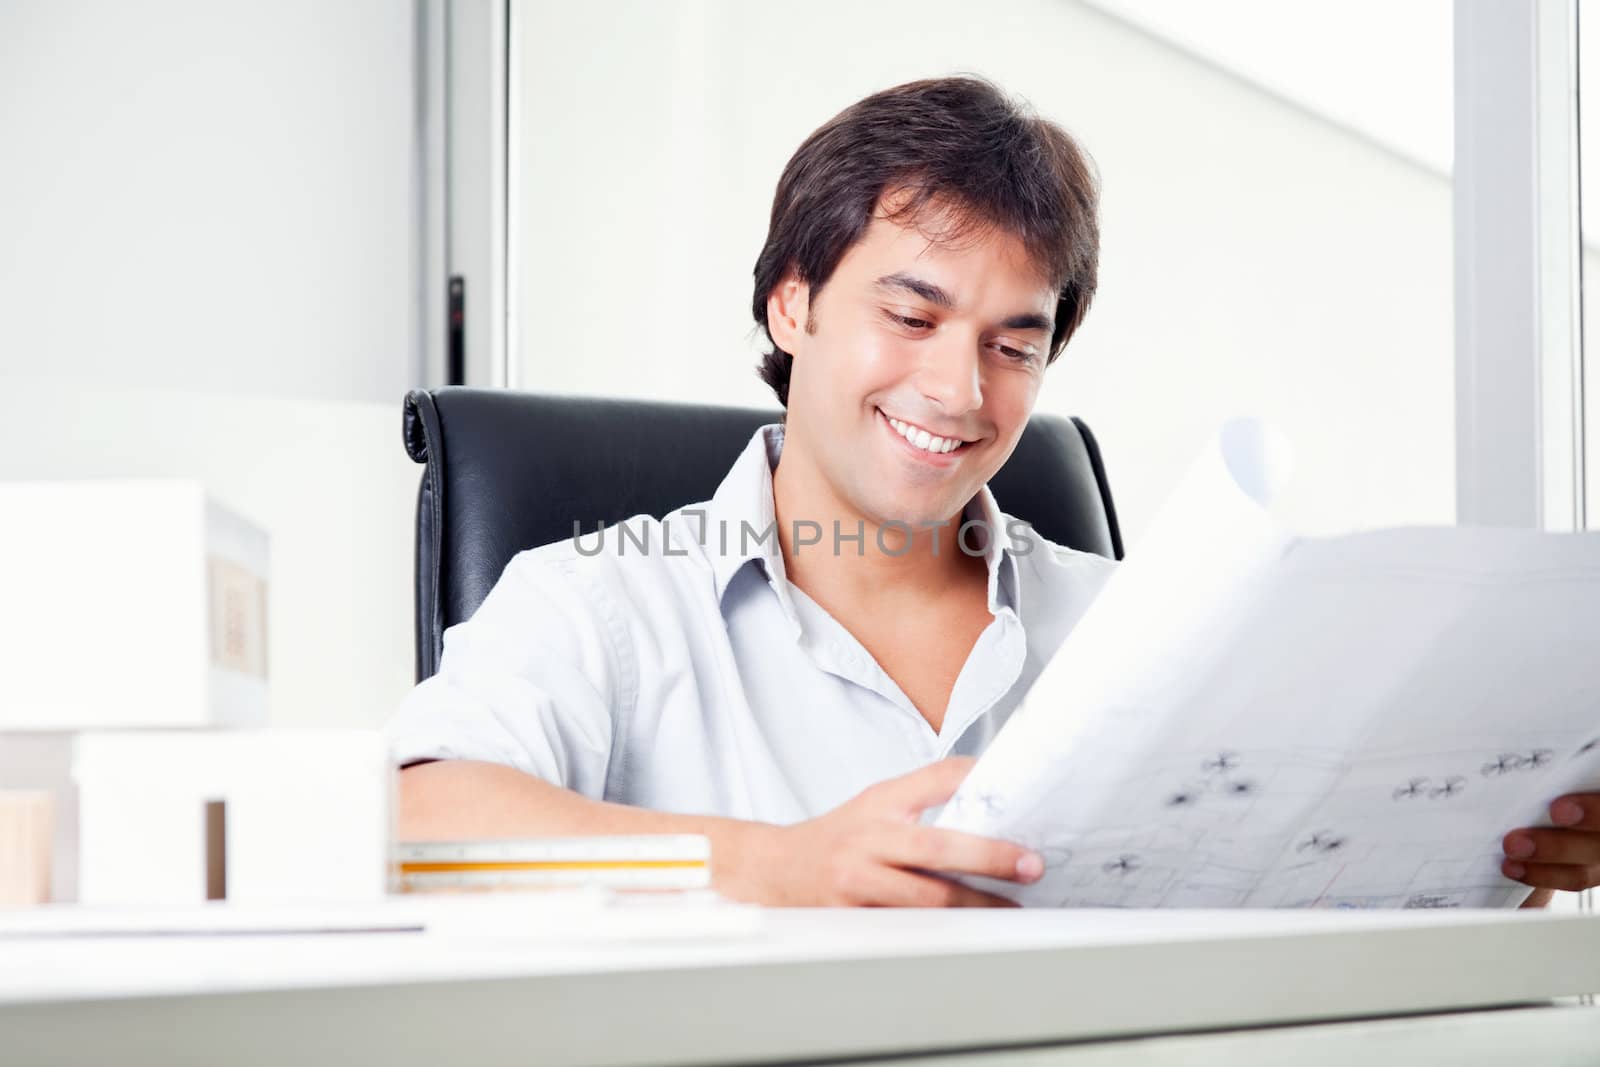 Smiling happy architect looking at blueprints in office.